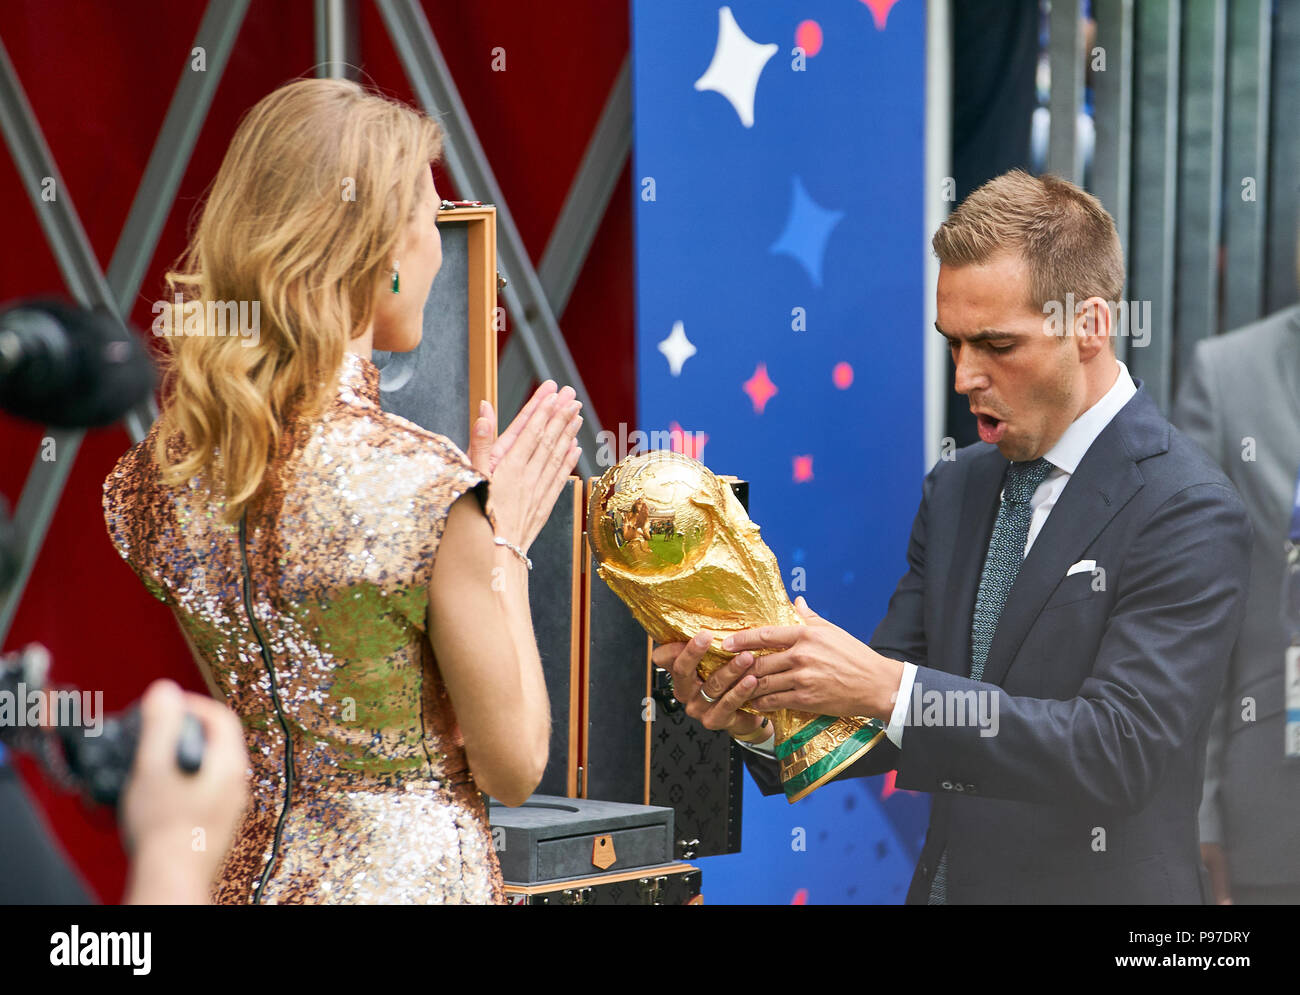 Moscow, Russia. 15th July 2018.  World Cup winner 2014 captain Philipp LAHM, Germany, russian supermodel, activist, and philanthropist Natalia VODIANOVA with the Official FIFA World Cup Original Trophy,  FRANCE - CROATIA  Football FIFA WORLD CUP 2018 RUSSIA, Final, Season 2018/2019, July 15, 2018 in Luzhniki Stadium Moscow, Russia. © Peter Schatz / Alamy Live News Stock Photo